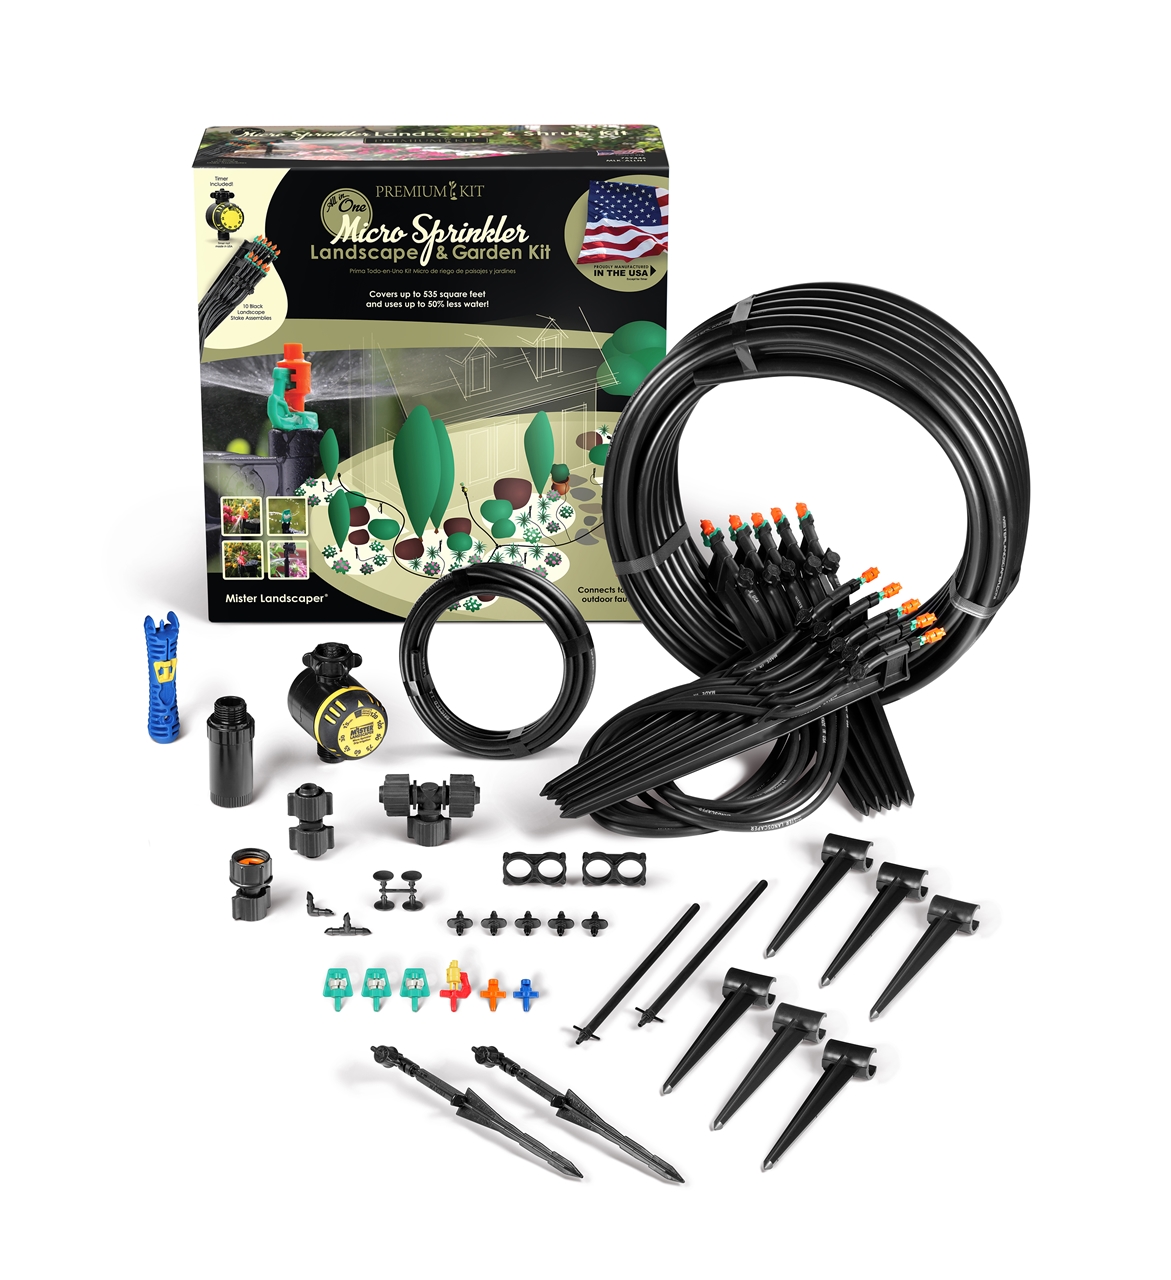 Mister Landscaper Drip Irrigation and Micro Spray. Drip Irrigation - Mister Landscaper  Hat